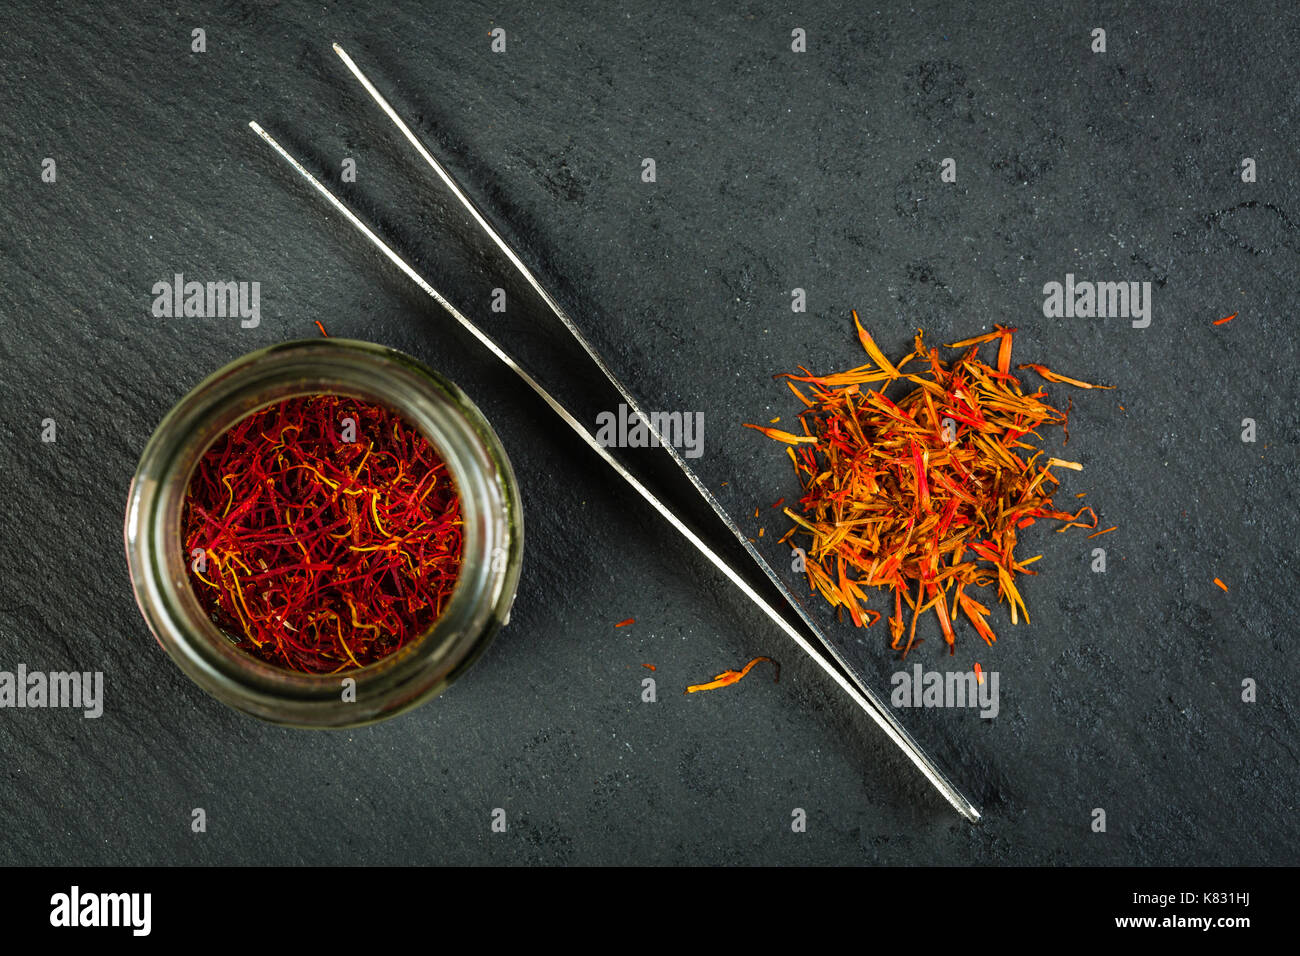 Moroccan (left) and Turkish (right) saffron. hey are often used in Arabic cuisine. Stock Photo